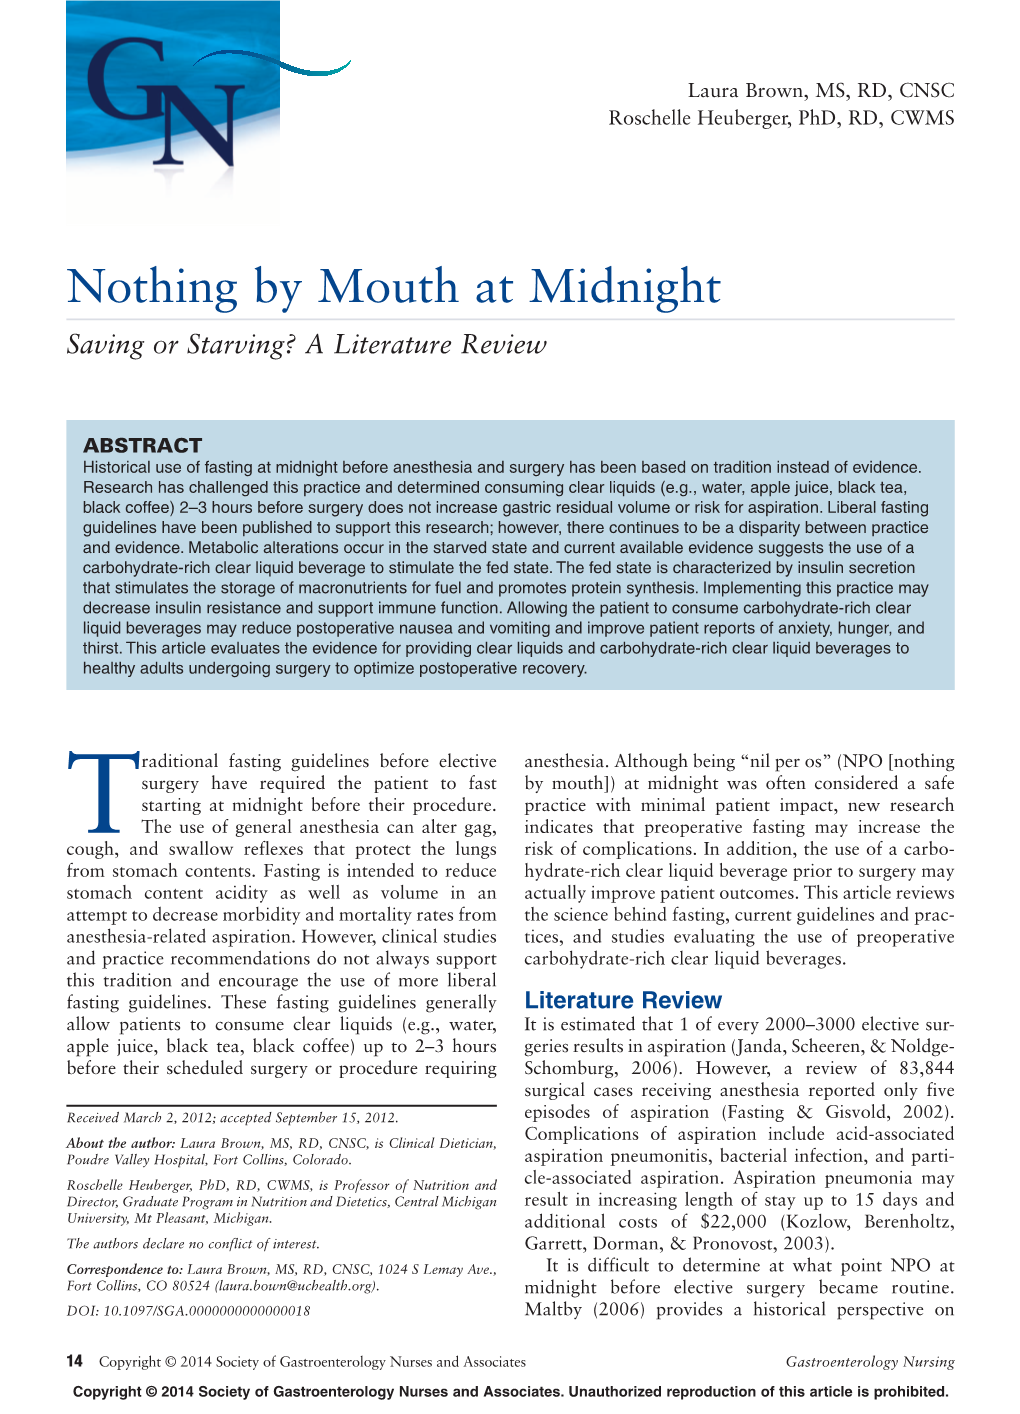 Nothing by Mouth at Midnight Saving Or Starving? a Literature Review